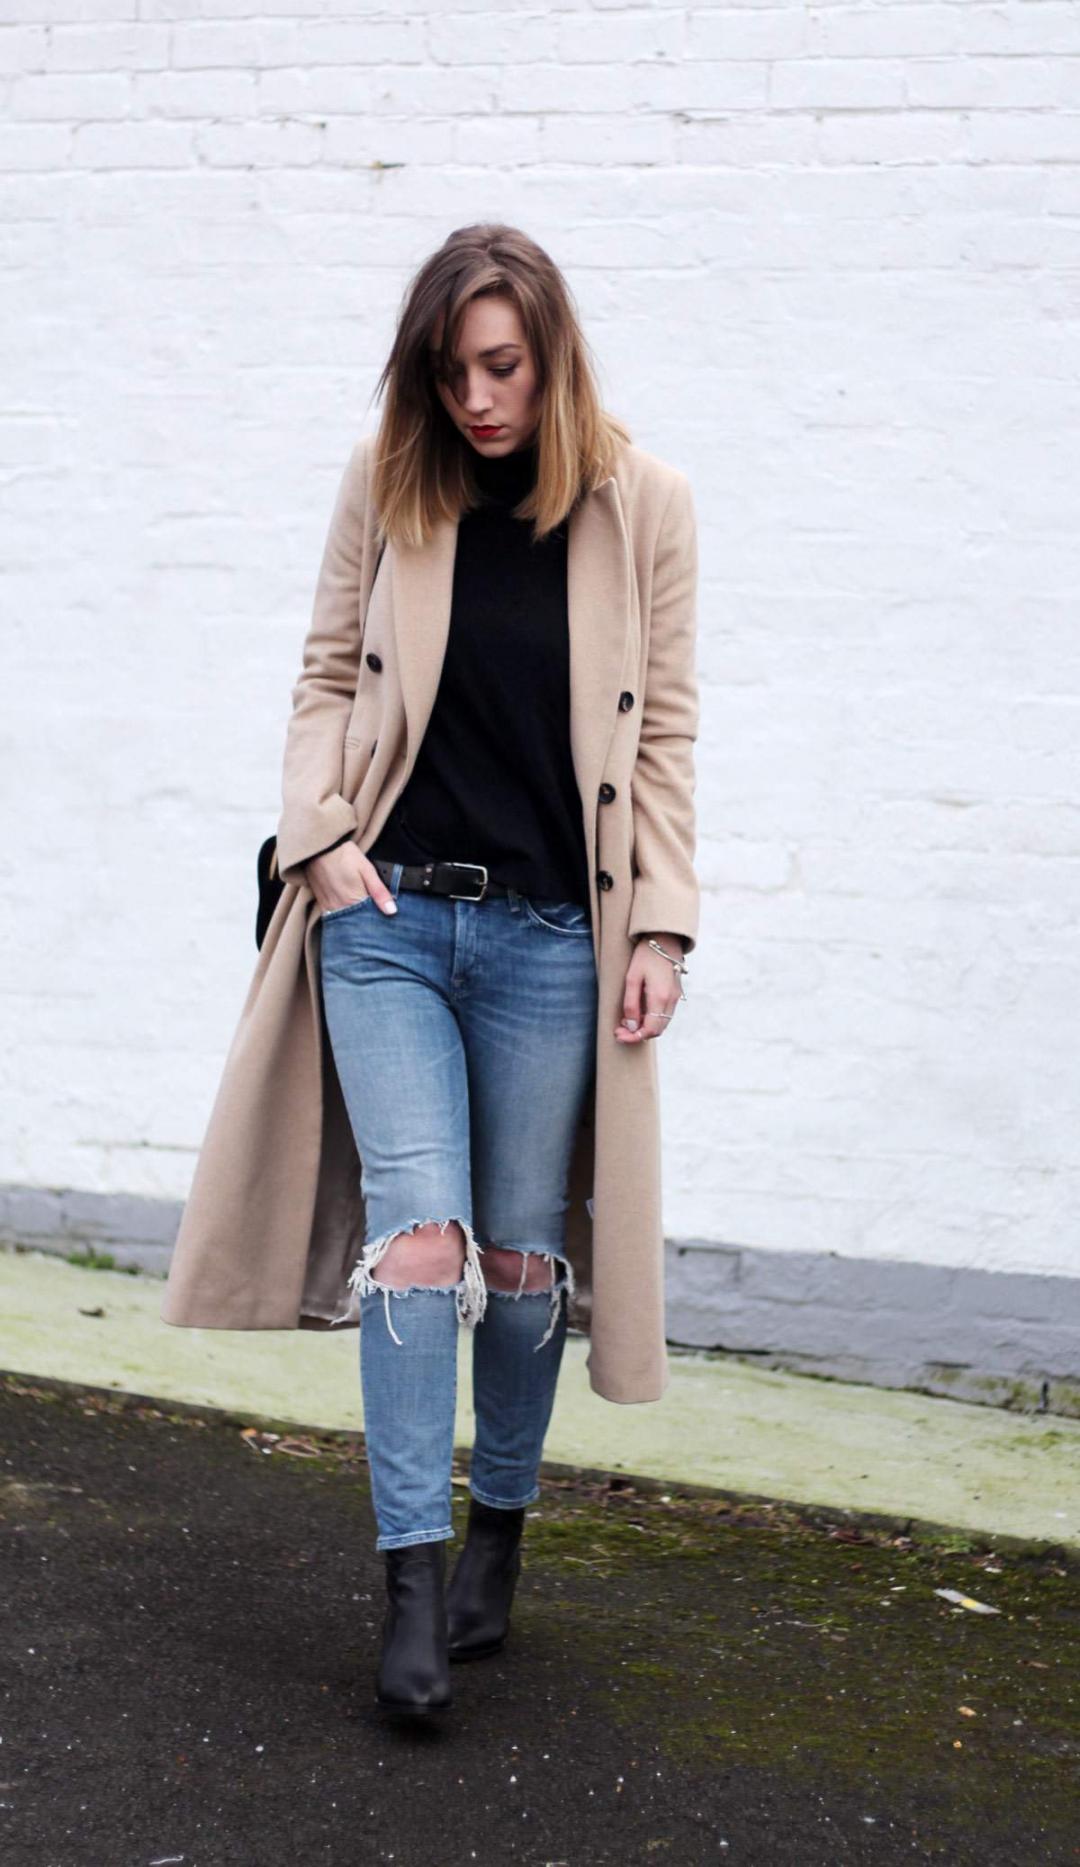 topshop-outfit-long-camel-coat-sock-boots-7-for-all-mankind-jeans-suede-bag